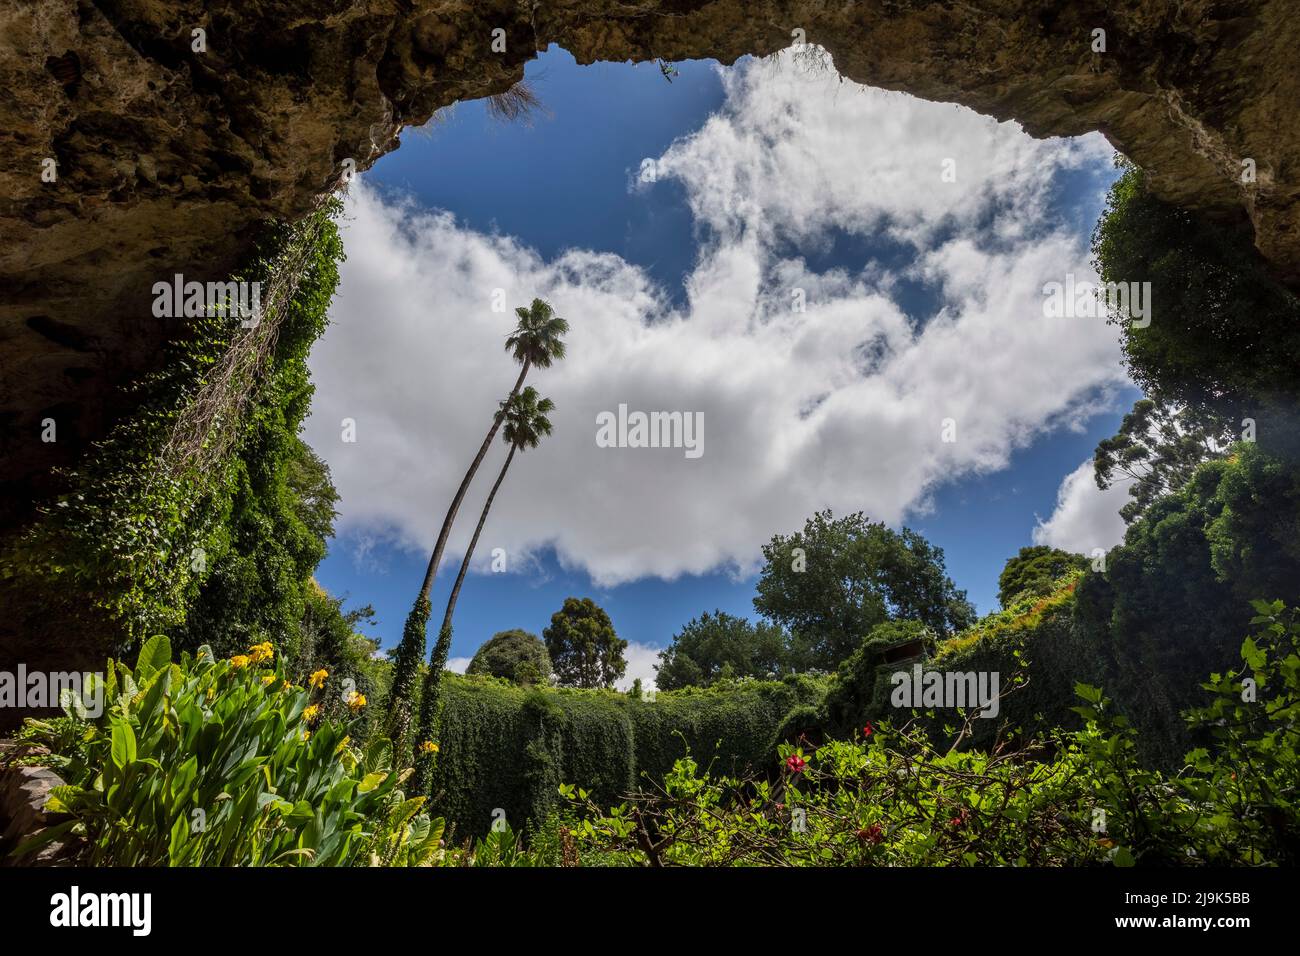 Low angle view lush foliage growing in cave under sunny sky, Umpherston Sinkhole, Australia Stock Photo